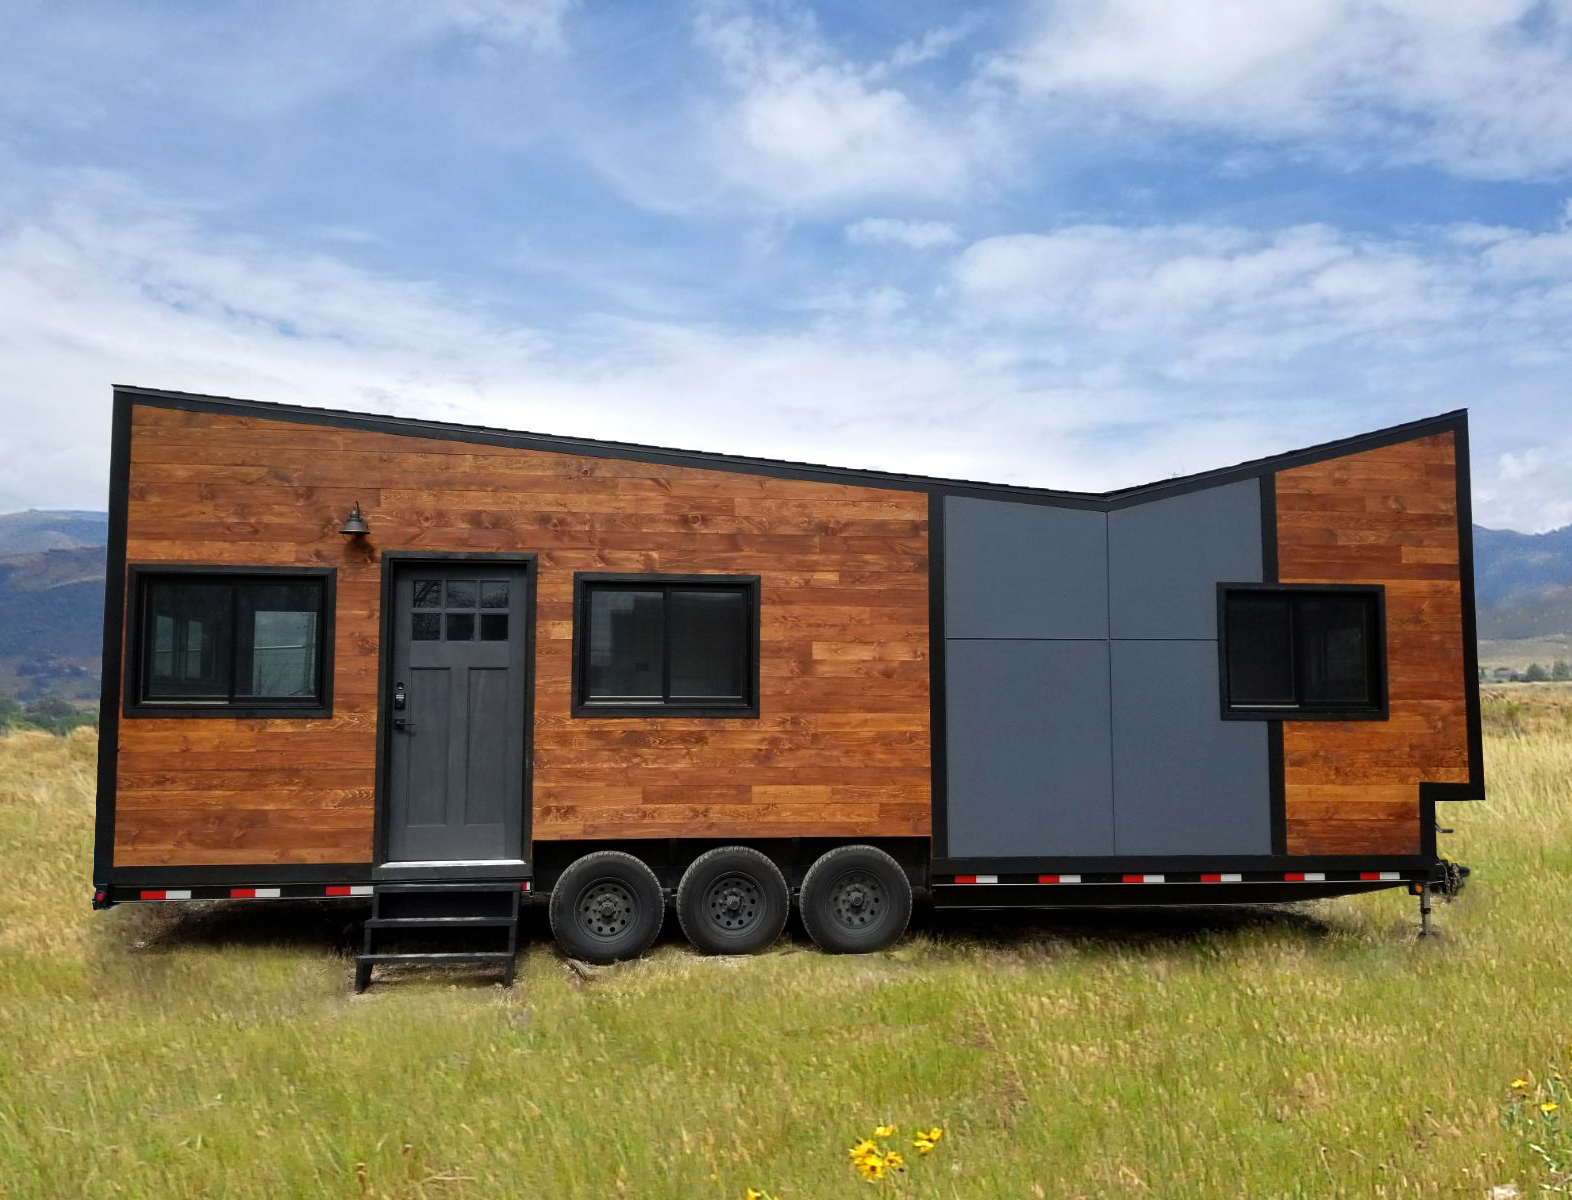 Where Can I Put My Tiny House A Near Comprehensive List Of Tiny House Parking Resources Tiny House Builders B B Micro Manufacturing,How To Make Tempura Batter For Chicken